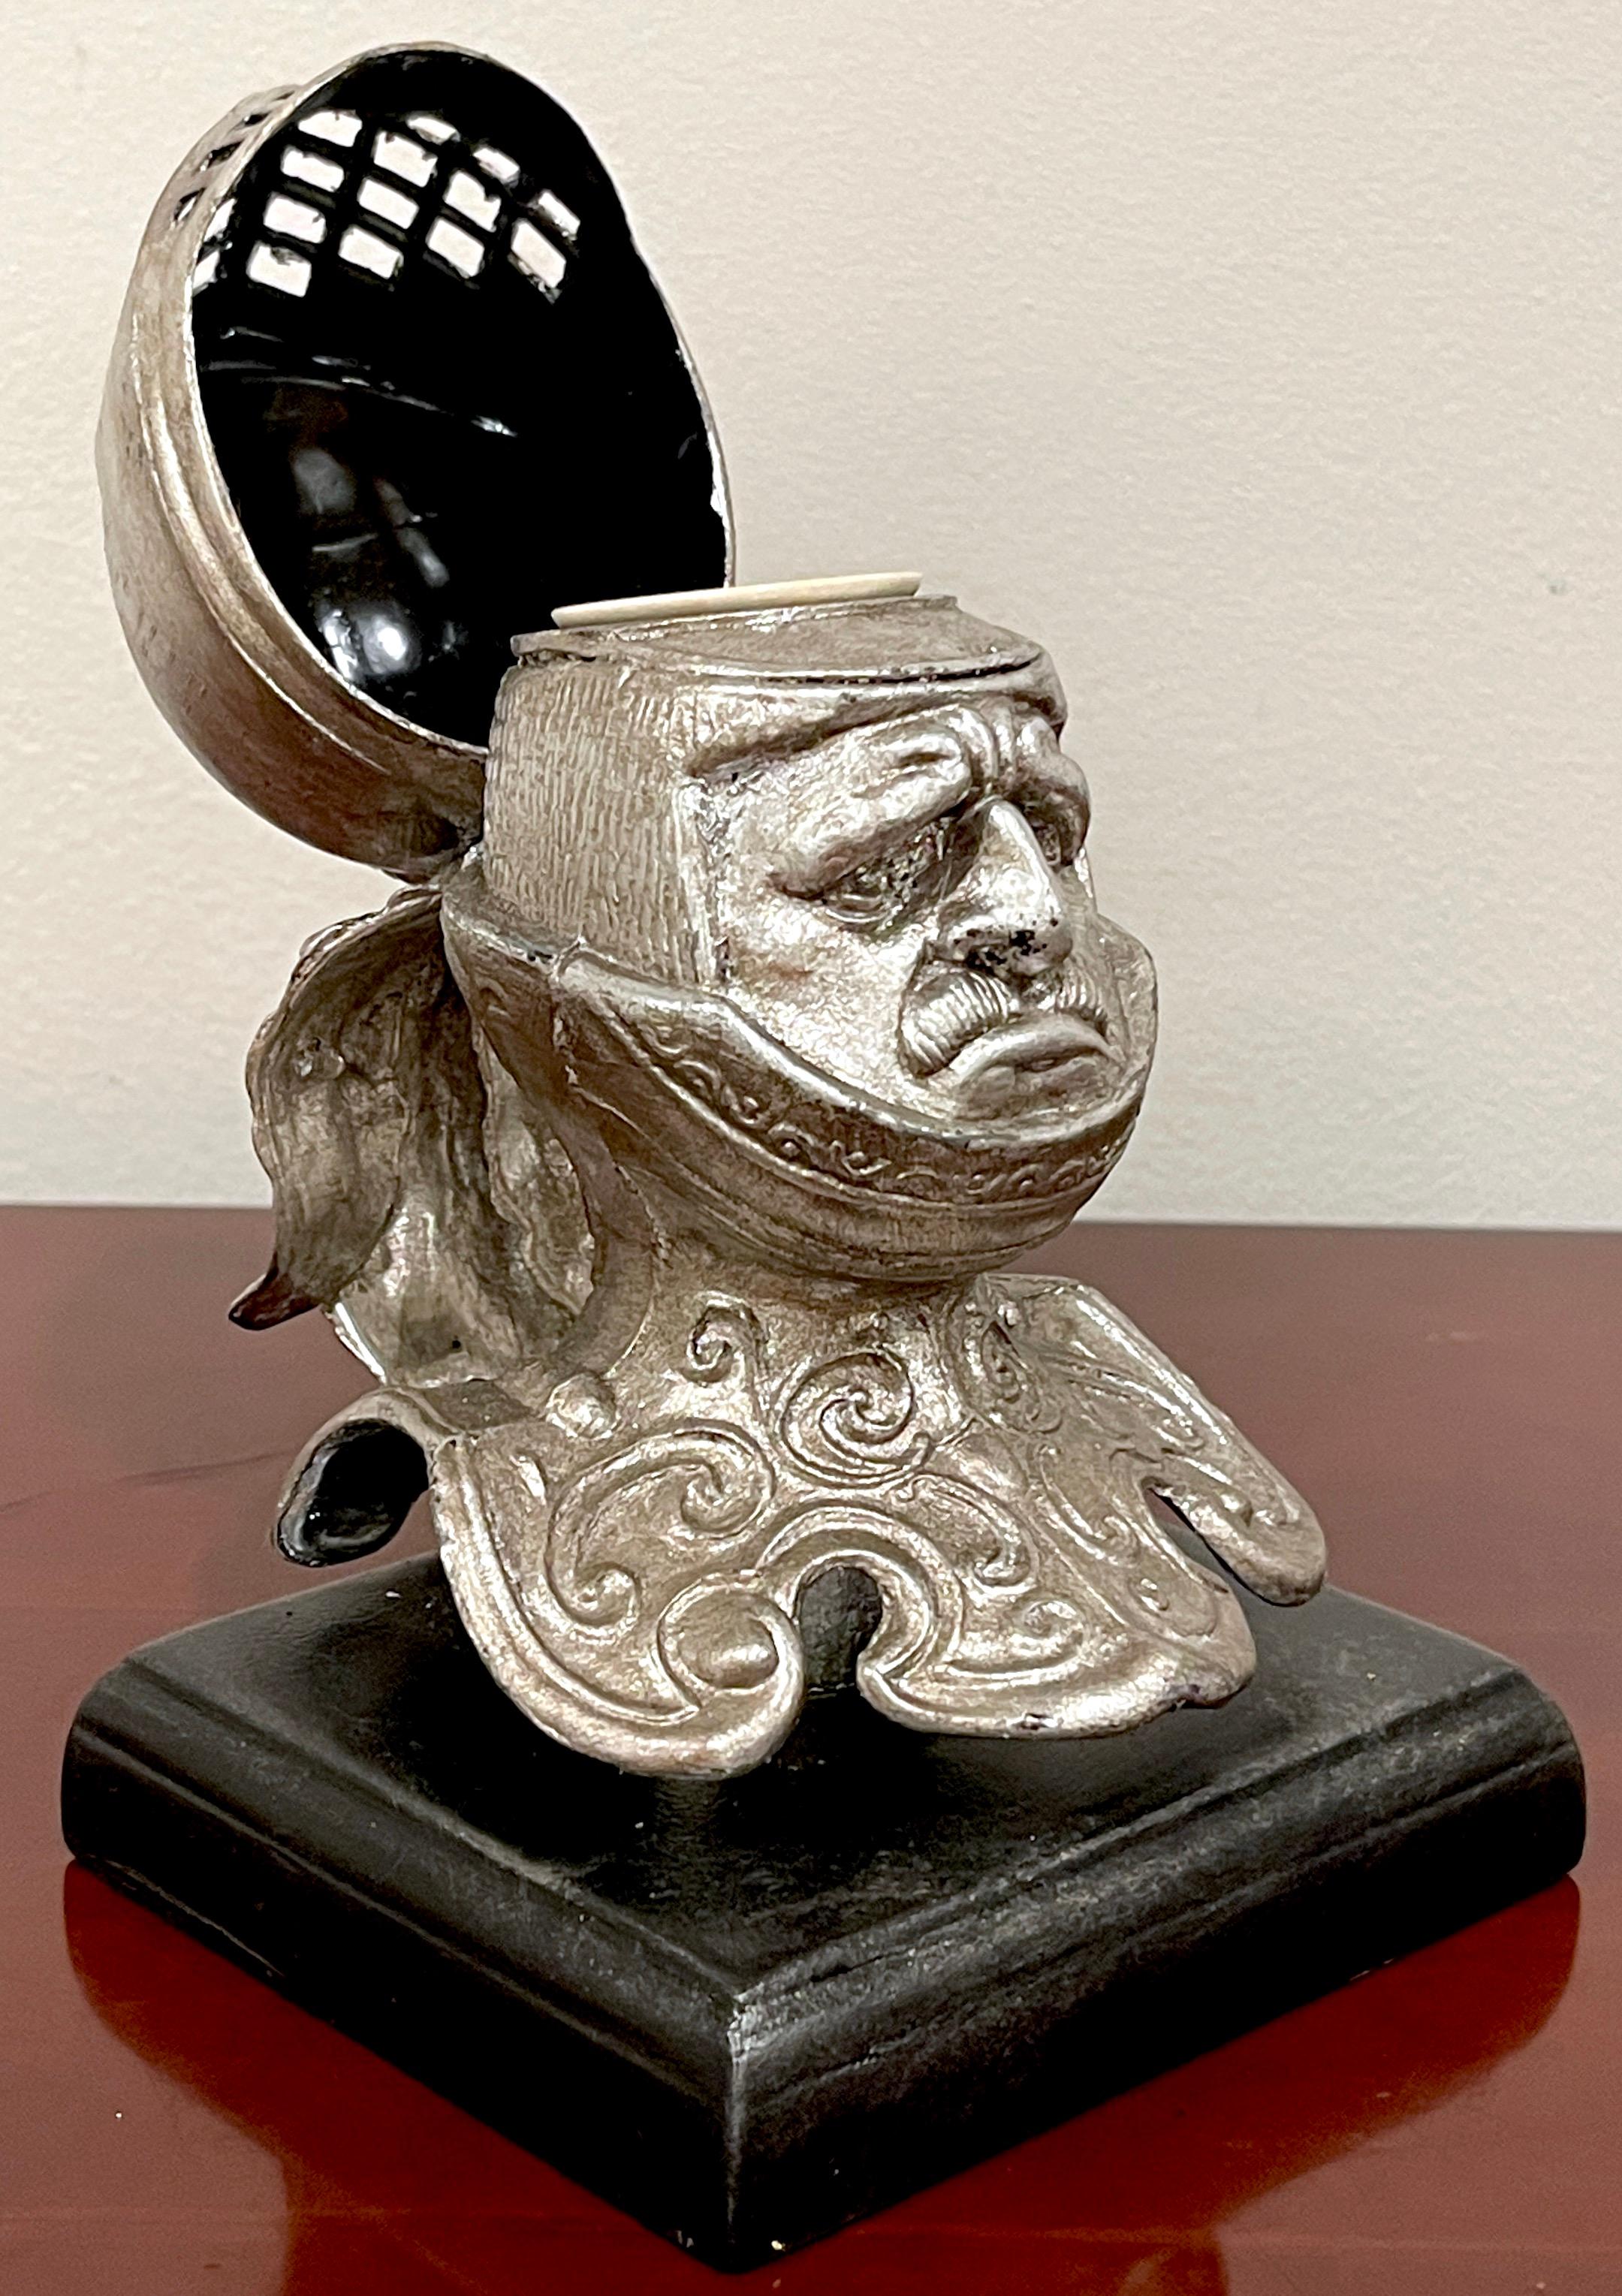 19th Century English Silvered Metal 'Worried Knight' Inkwell

Add a touch of classical whimsy to your home or office with our tole figural knight inkwell. Made in later 19th century England, this charming piece is adorned with an expressive knight